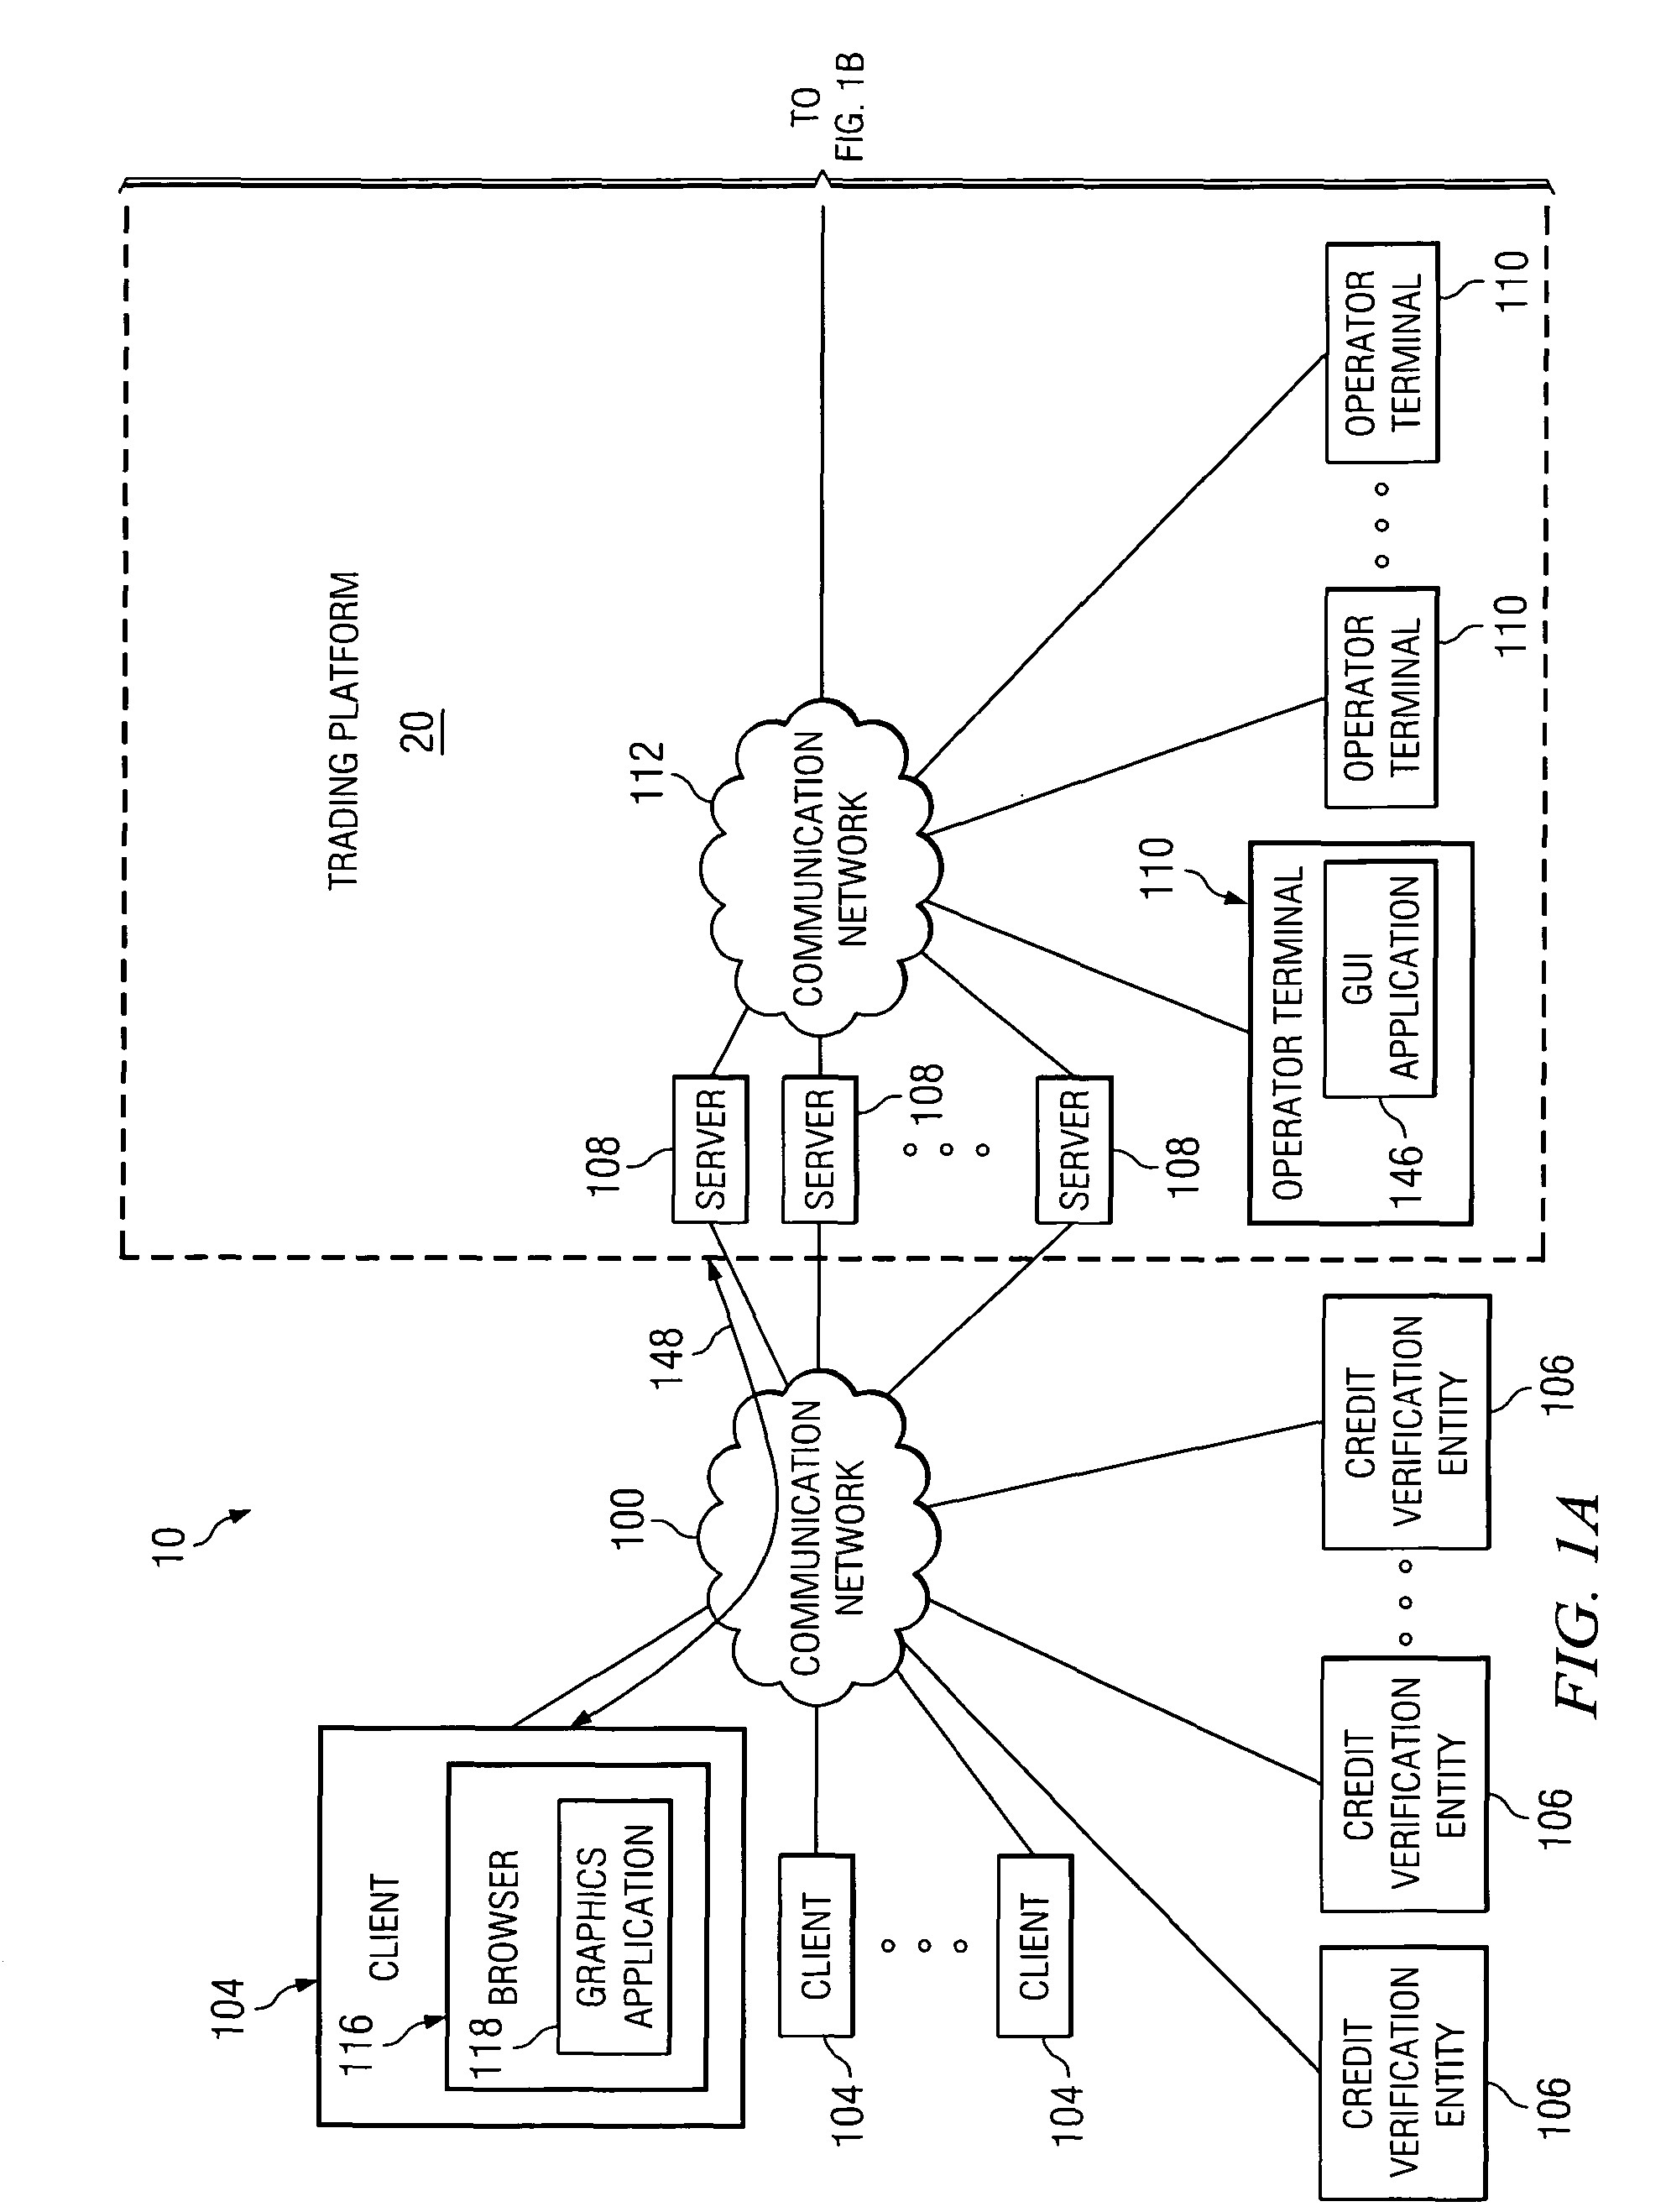 System and method for providing access to and managing account activity for an online account